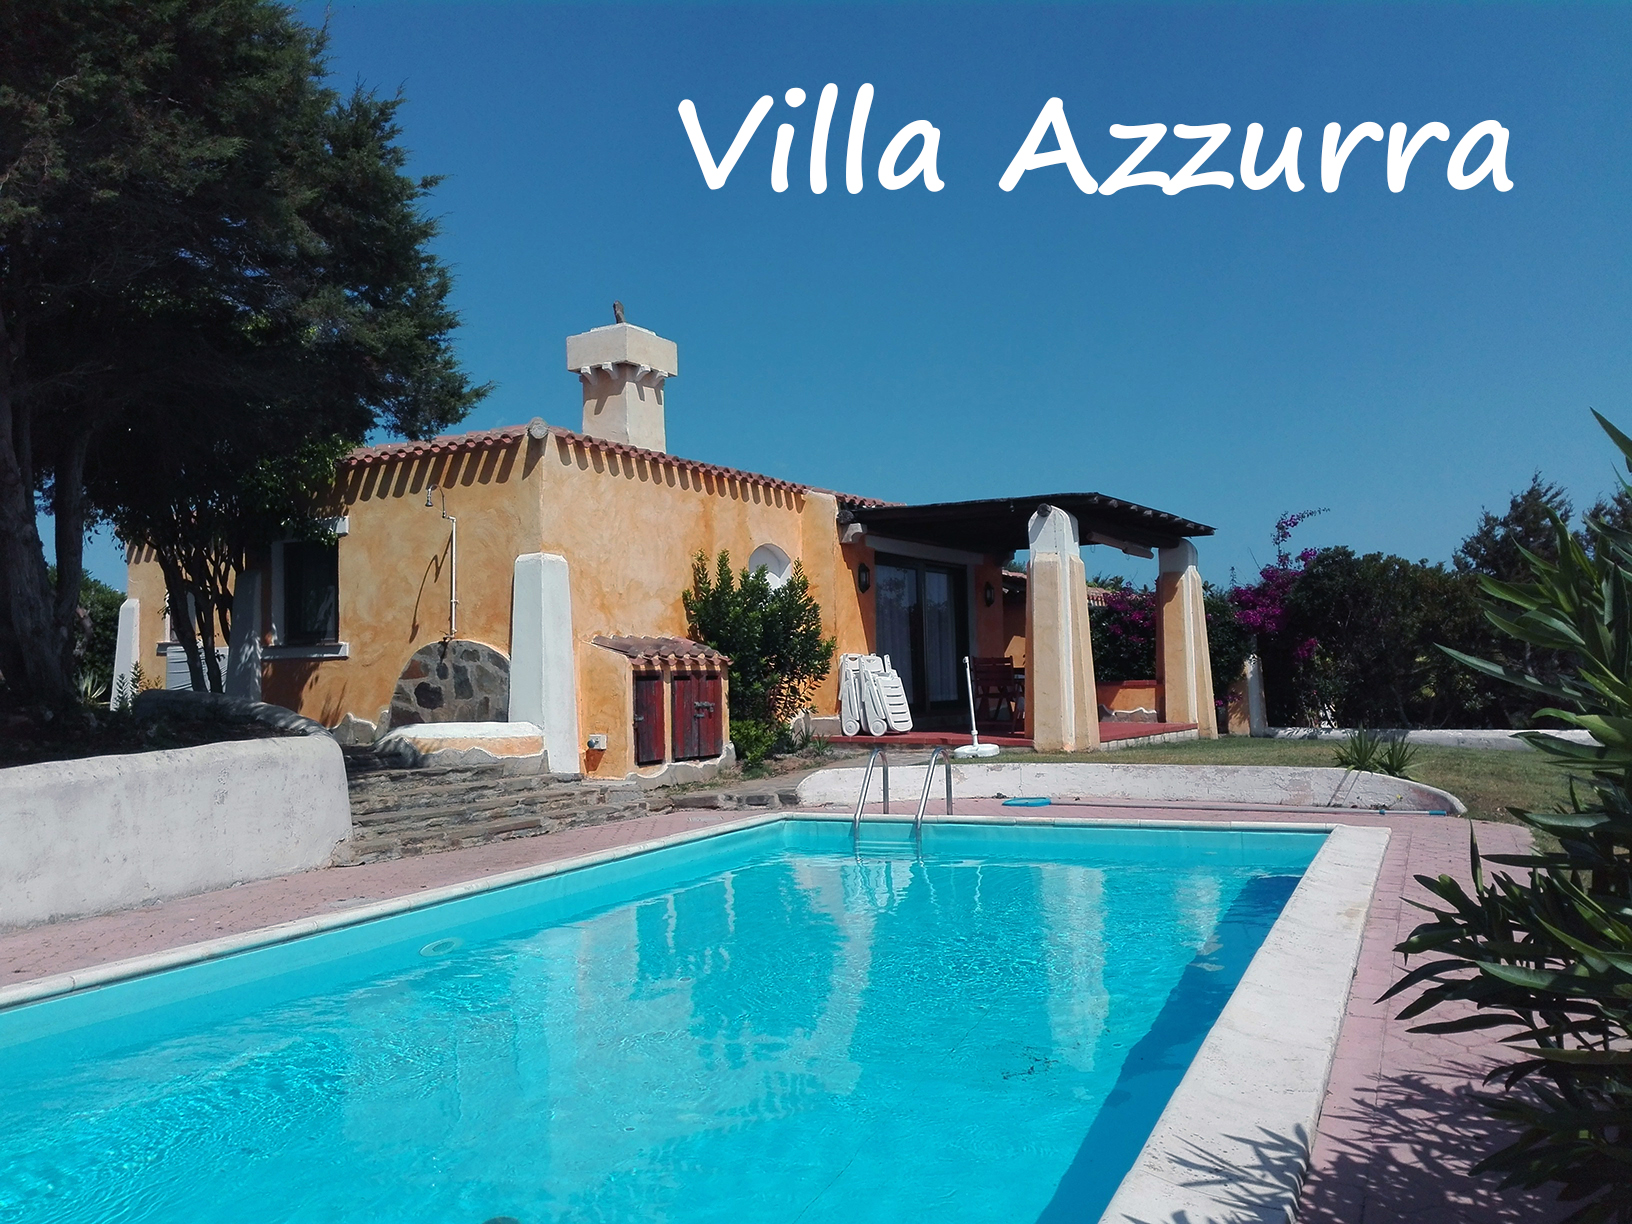 VILLA AZZURRA: VILLA ON ONLY A LEVEL, WITH GARDEN AND POOL AT THE EXCLUSIVE USE OF THE GUESTS. THERE ARE 2 BEDROOMS: A DOUBLE ROOM AND A TWIN ROOM.IT ACCOMODATES 4 PEOPLE